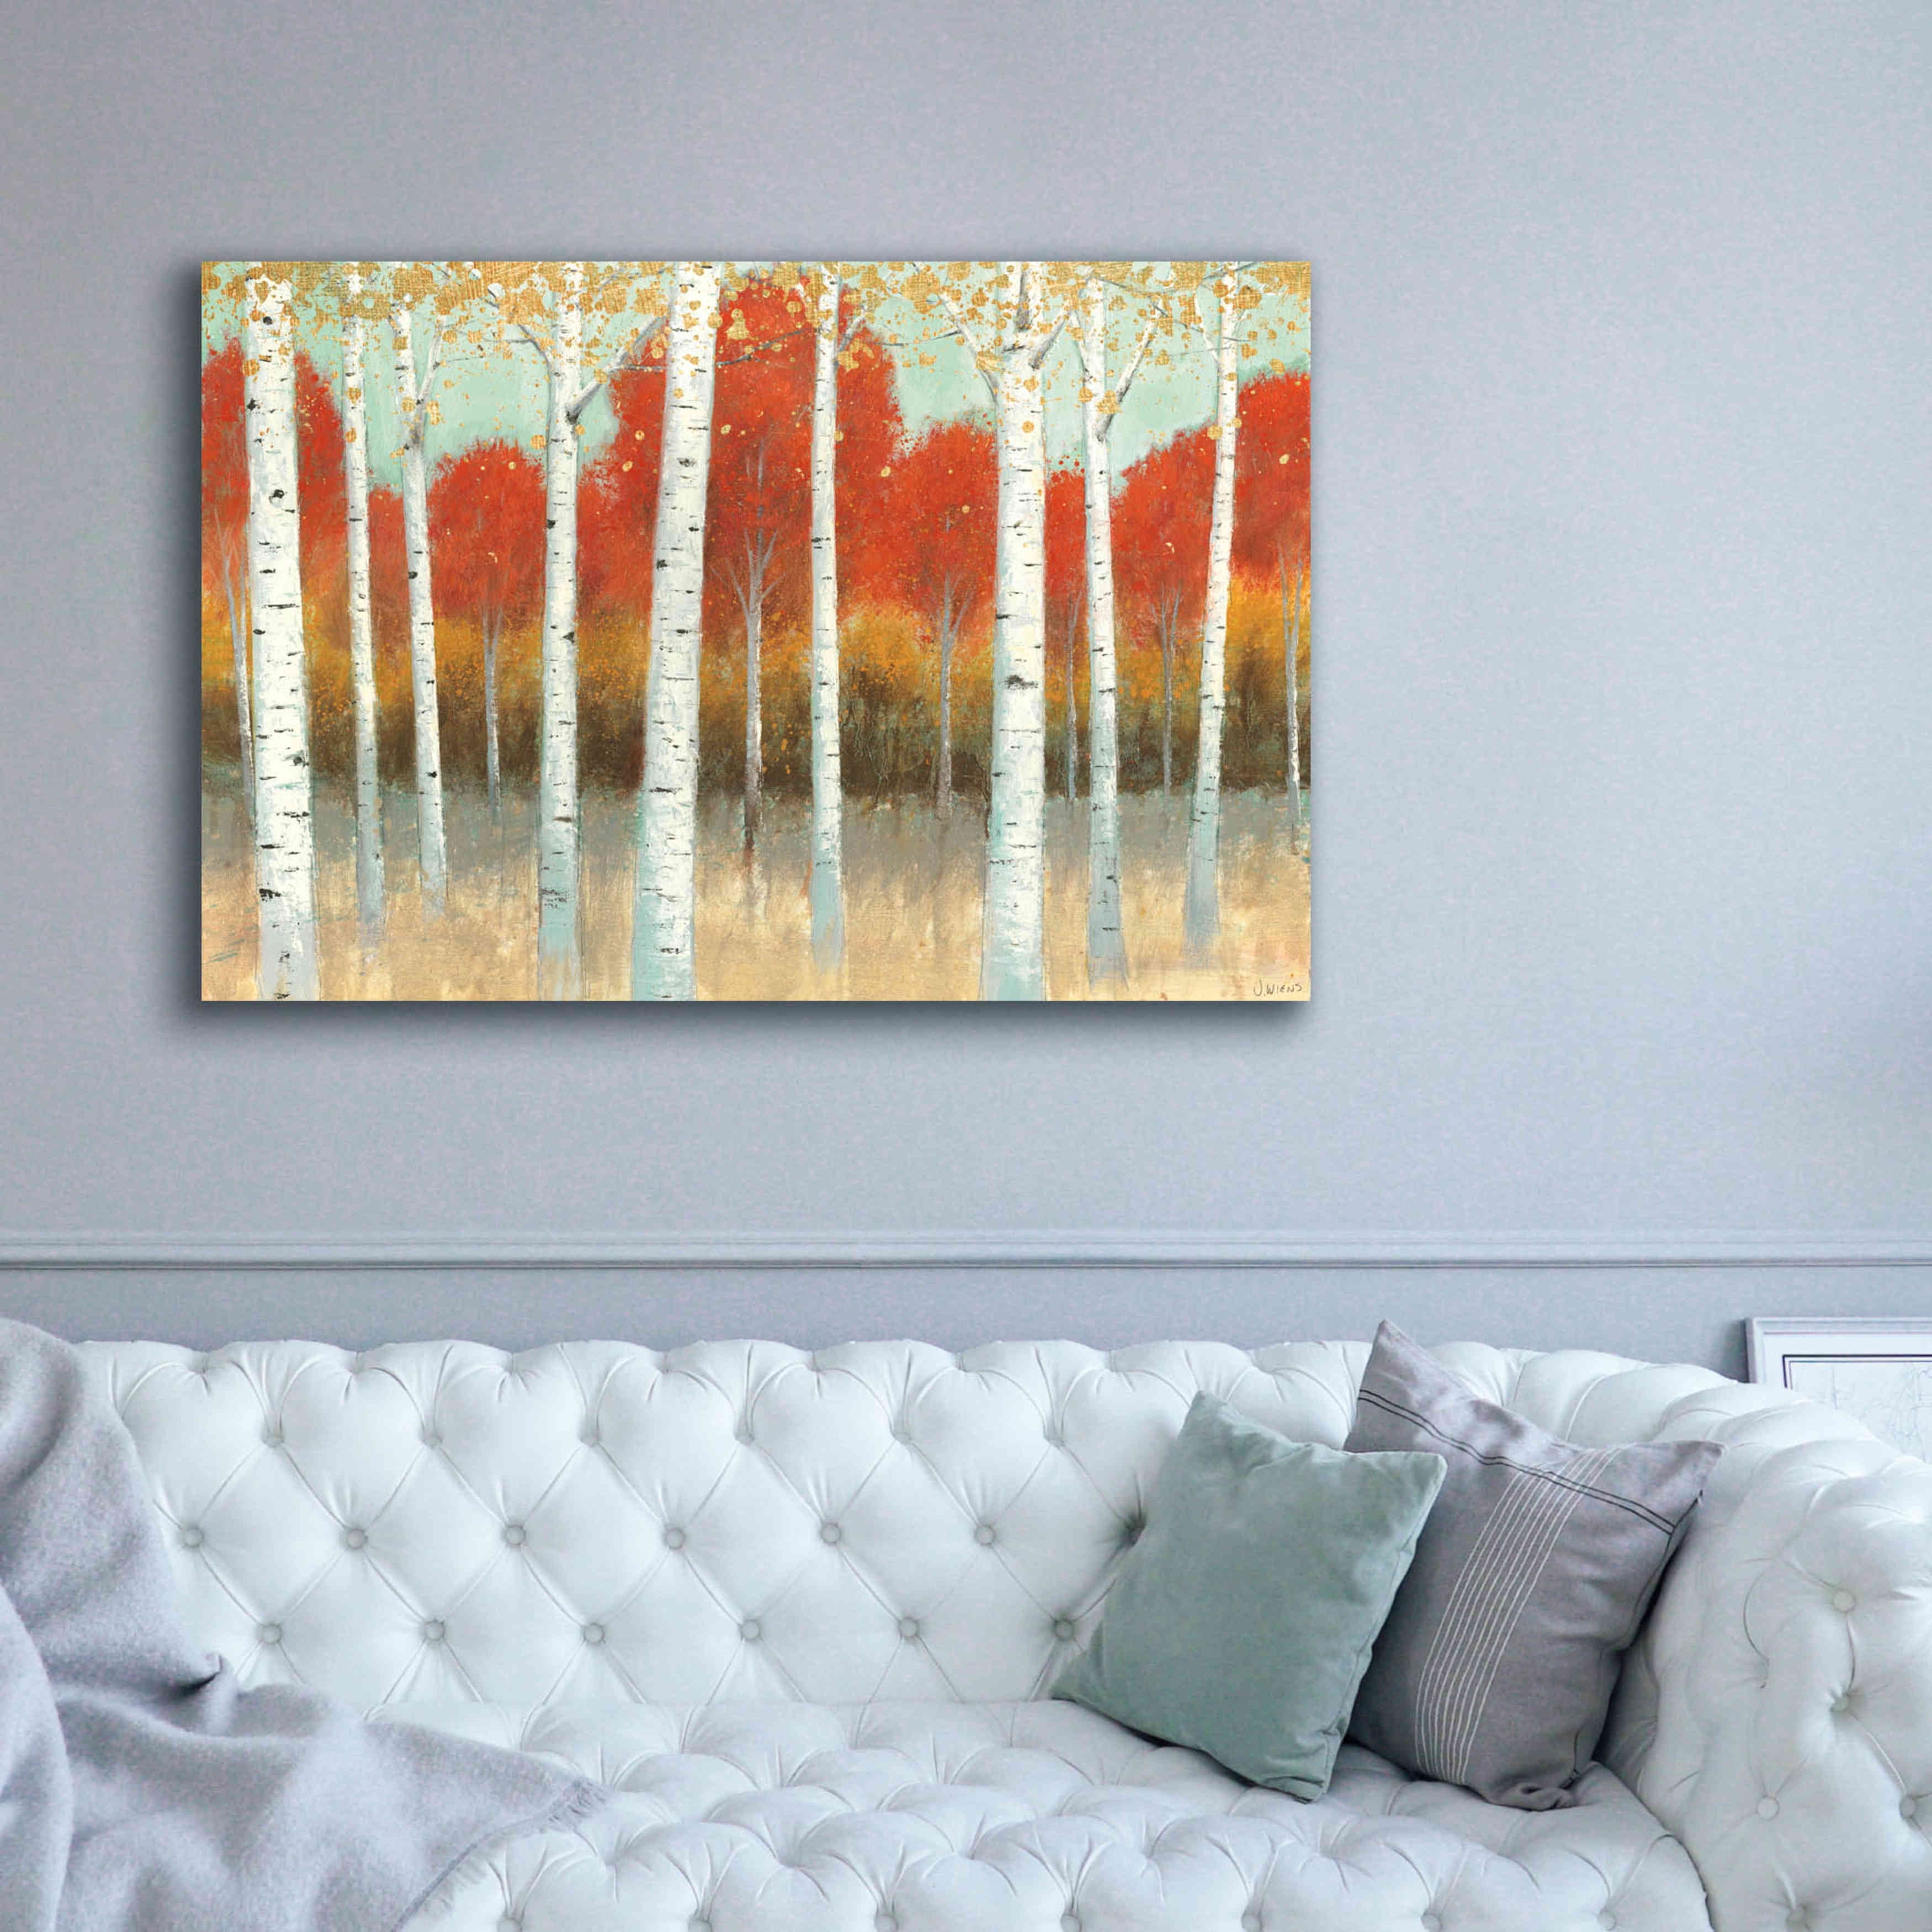 Fall Promenade I Giclee Stretched Canvas Artwork 24 x 20 Global Gallery James Wiens 